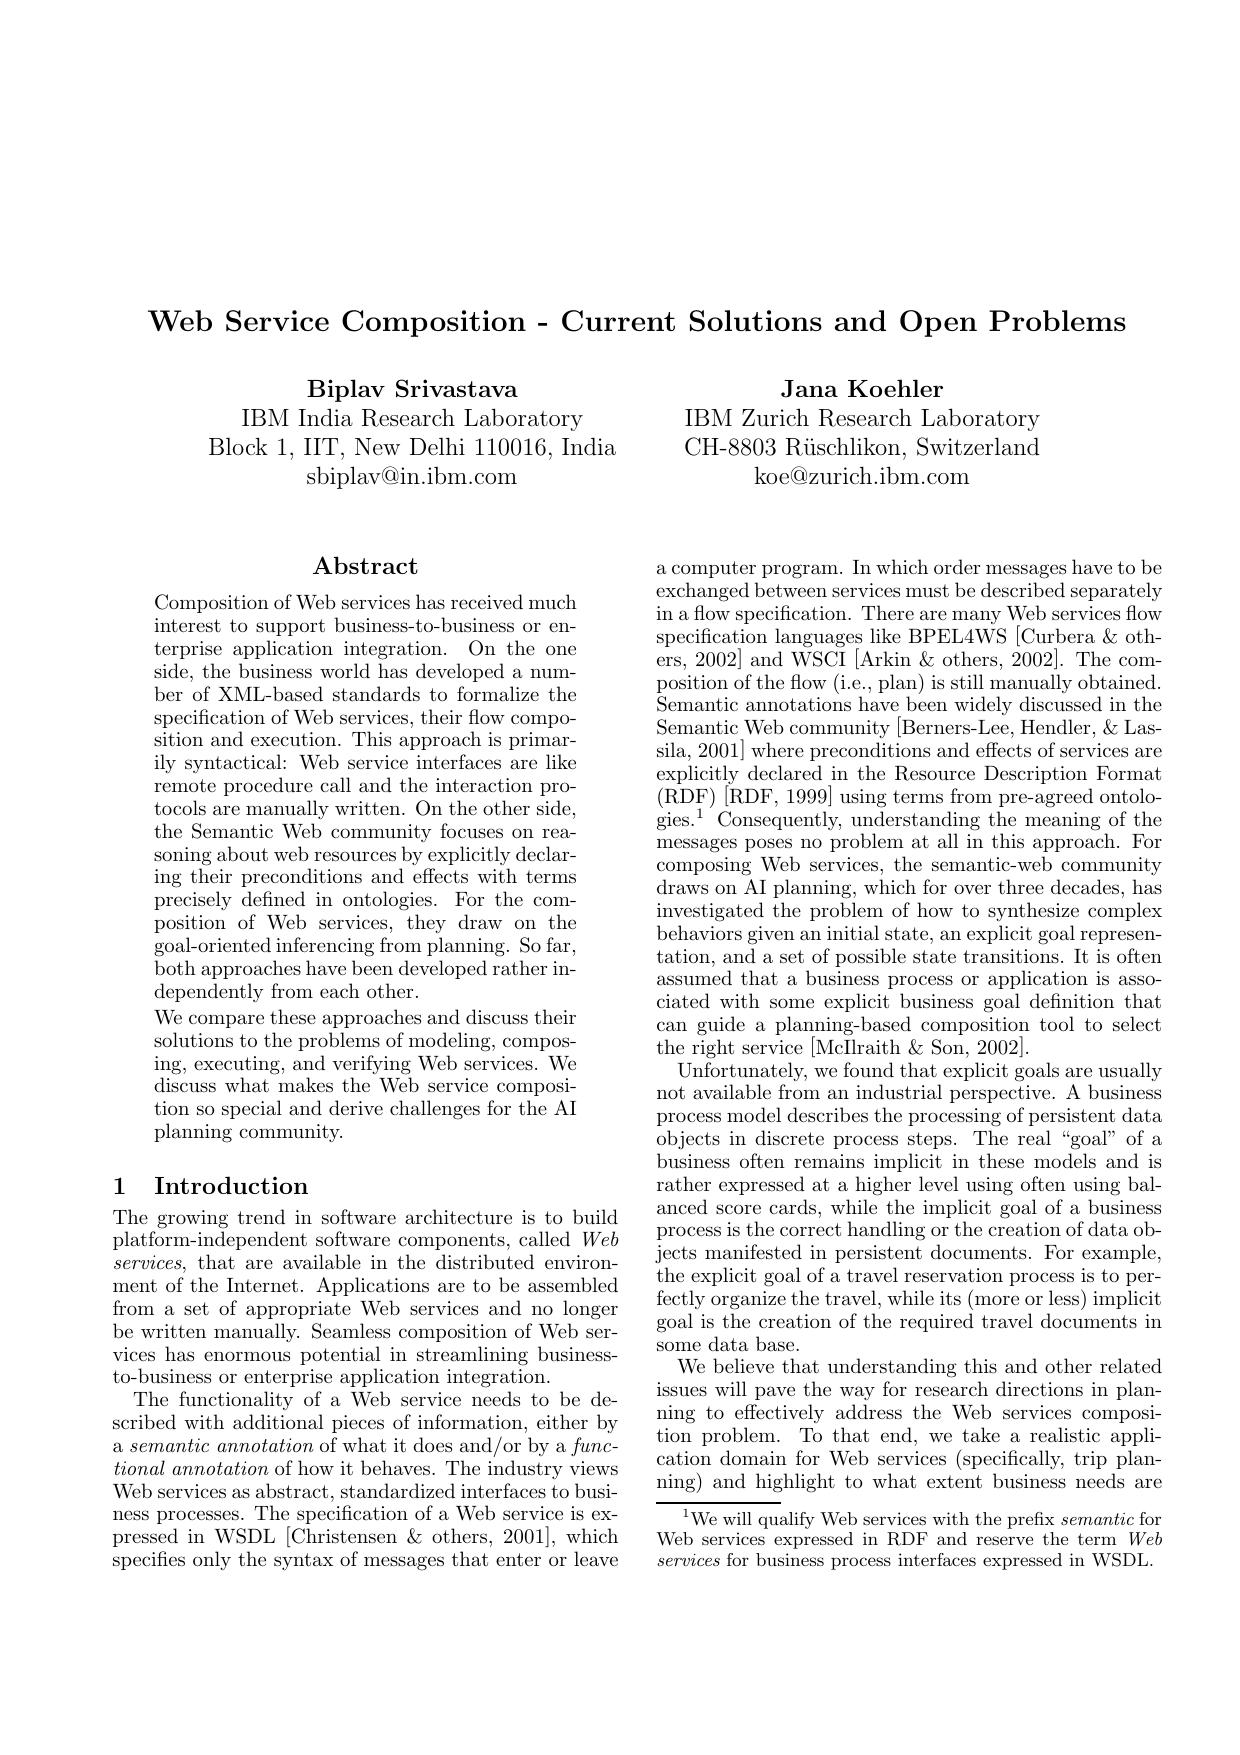 Web Service Composition - Current Solutions and Open Problems - Paper